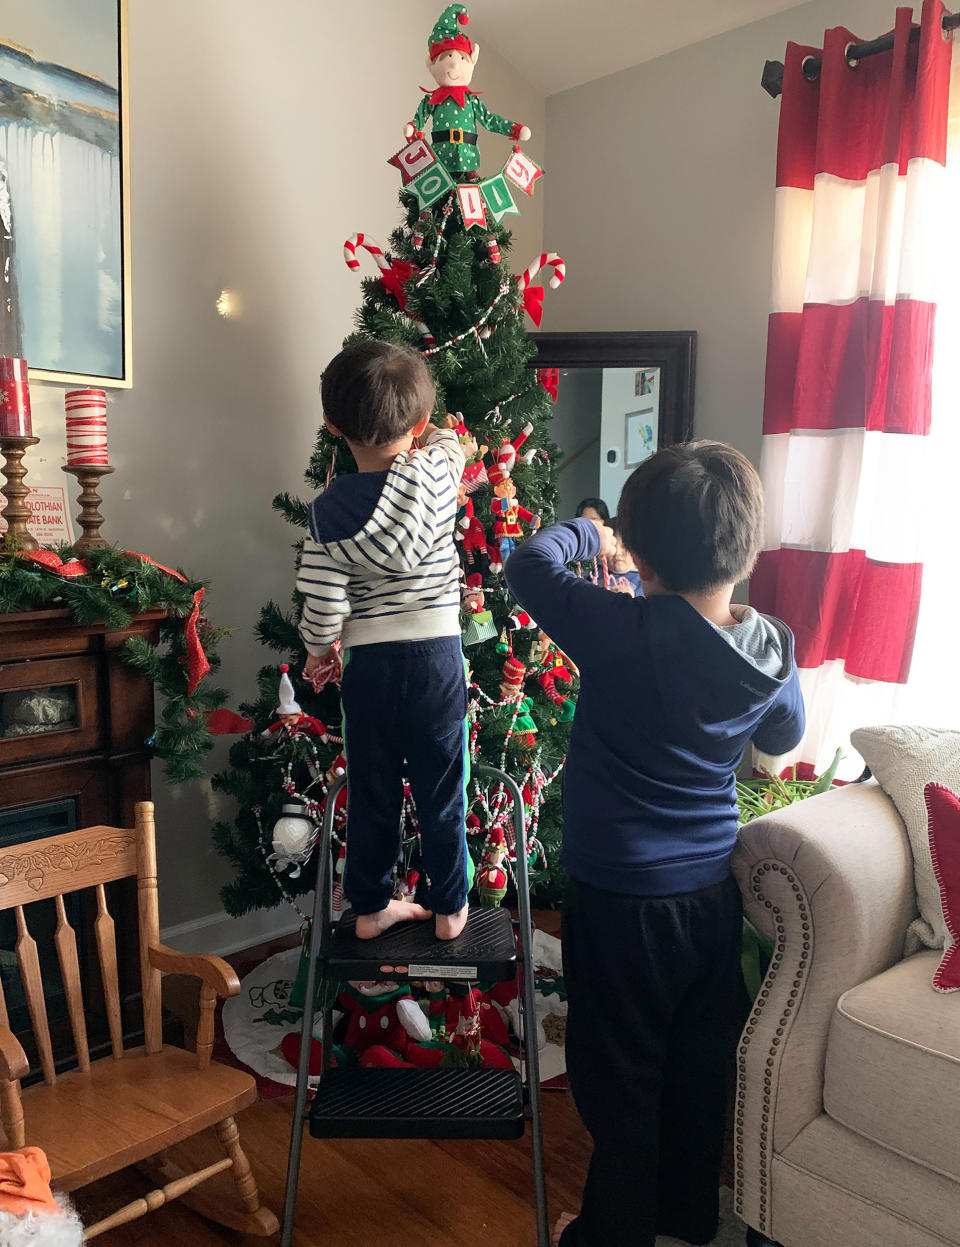 A.J. and Michael Schuber, ages 7 and 3, took the tree decorating into their own hands during a challenging year for their family. (Courtesy Sheena Schuber)